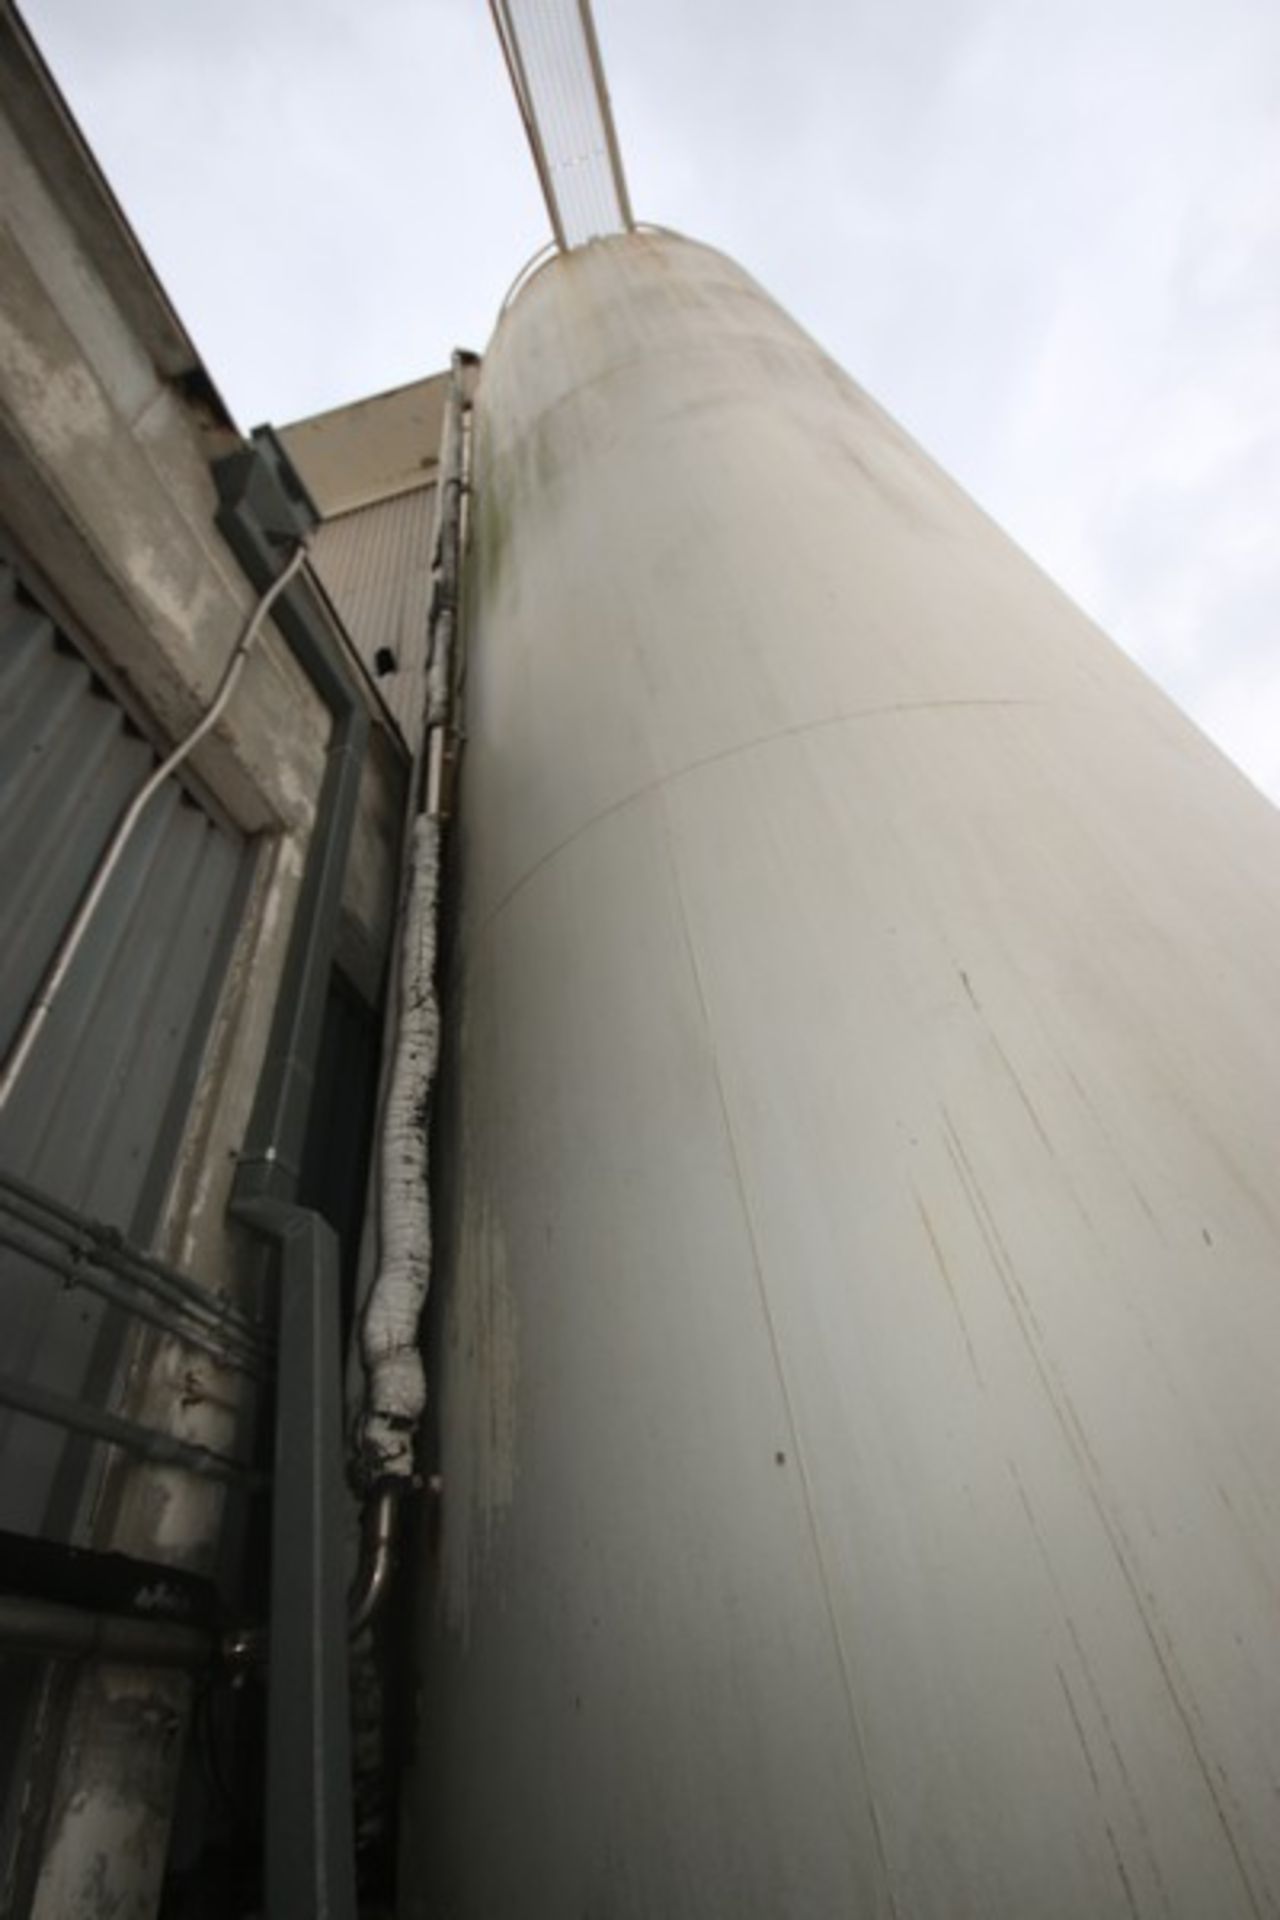 Aprox. 20,000 Gal. S/S Silo, Silo Dims.: Aprox. 10' Diameter x 35' H. Sloped Bottom, Partial - Image 10 of 10